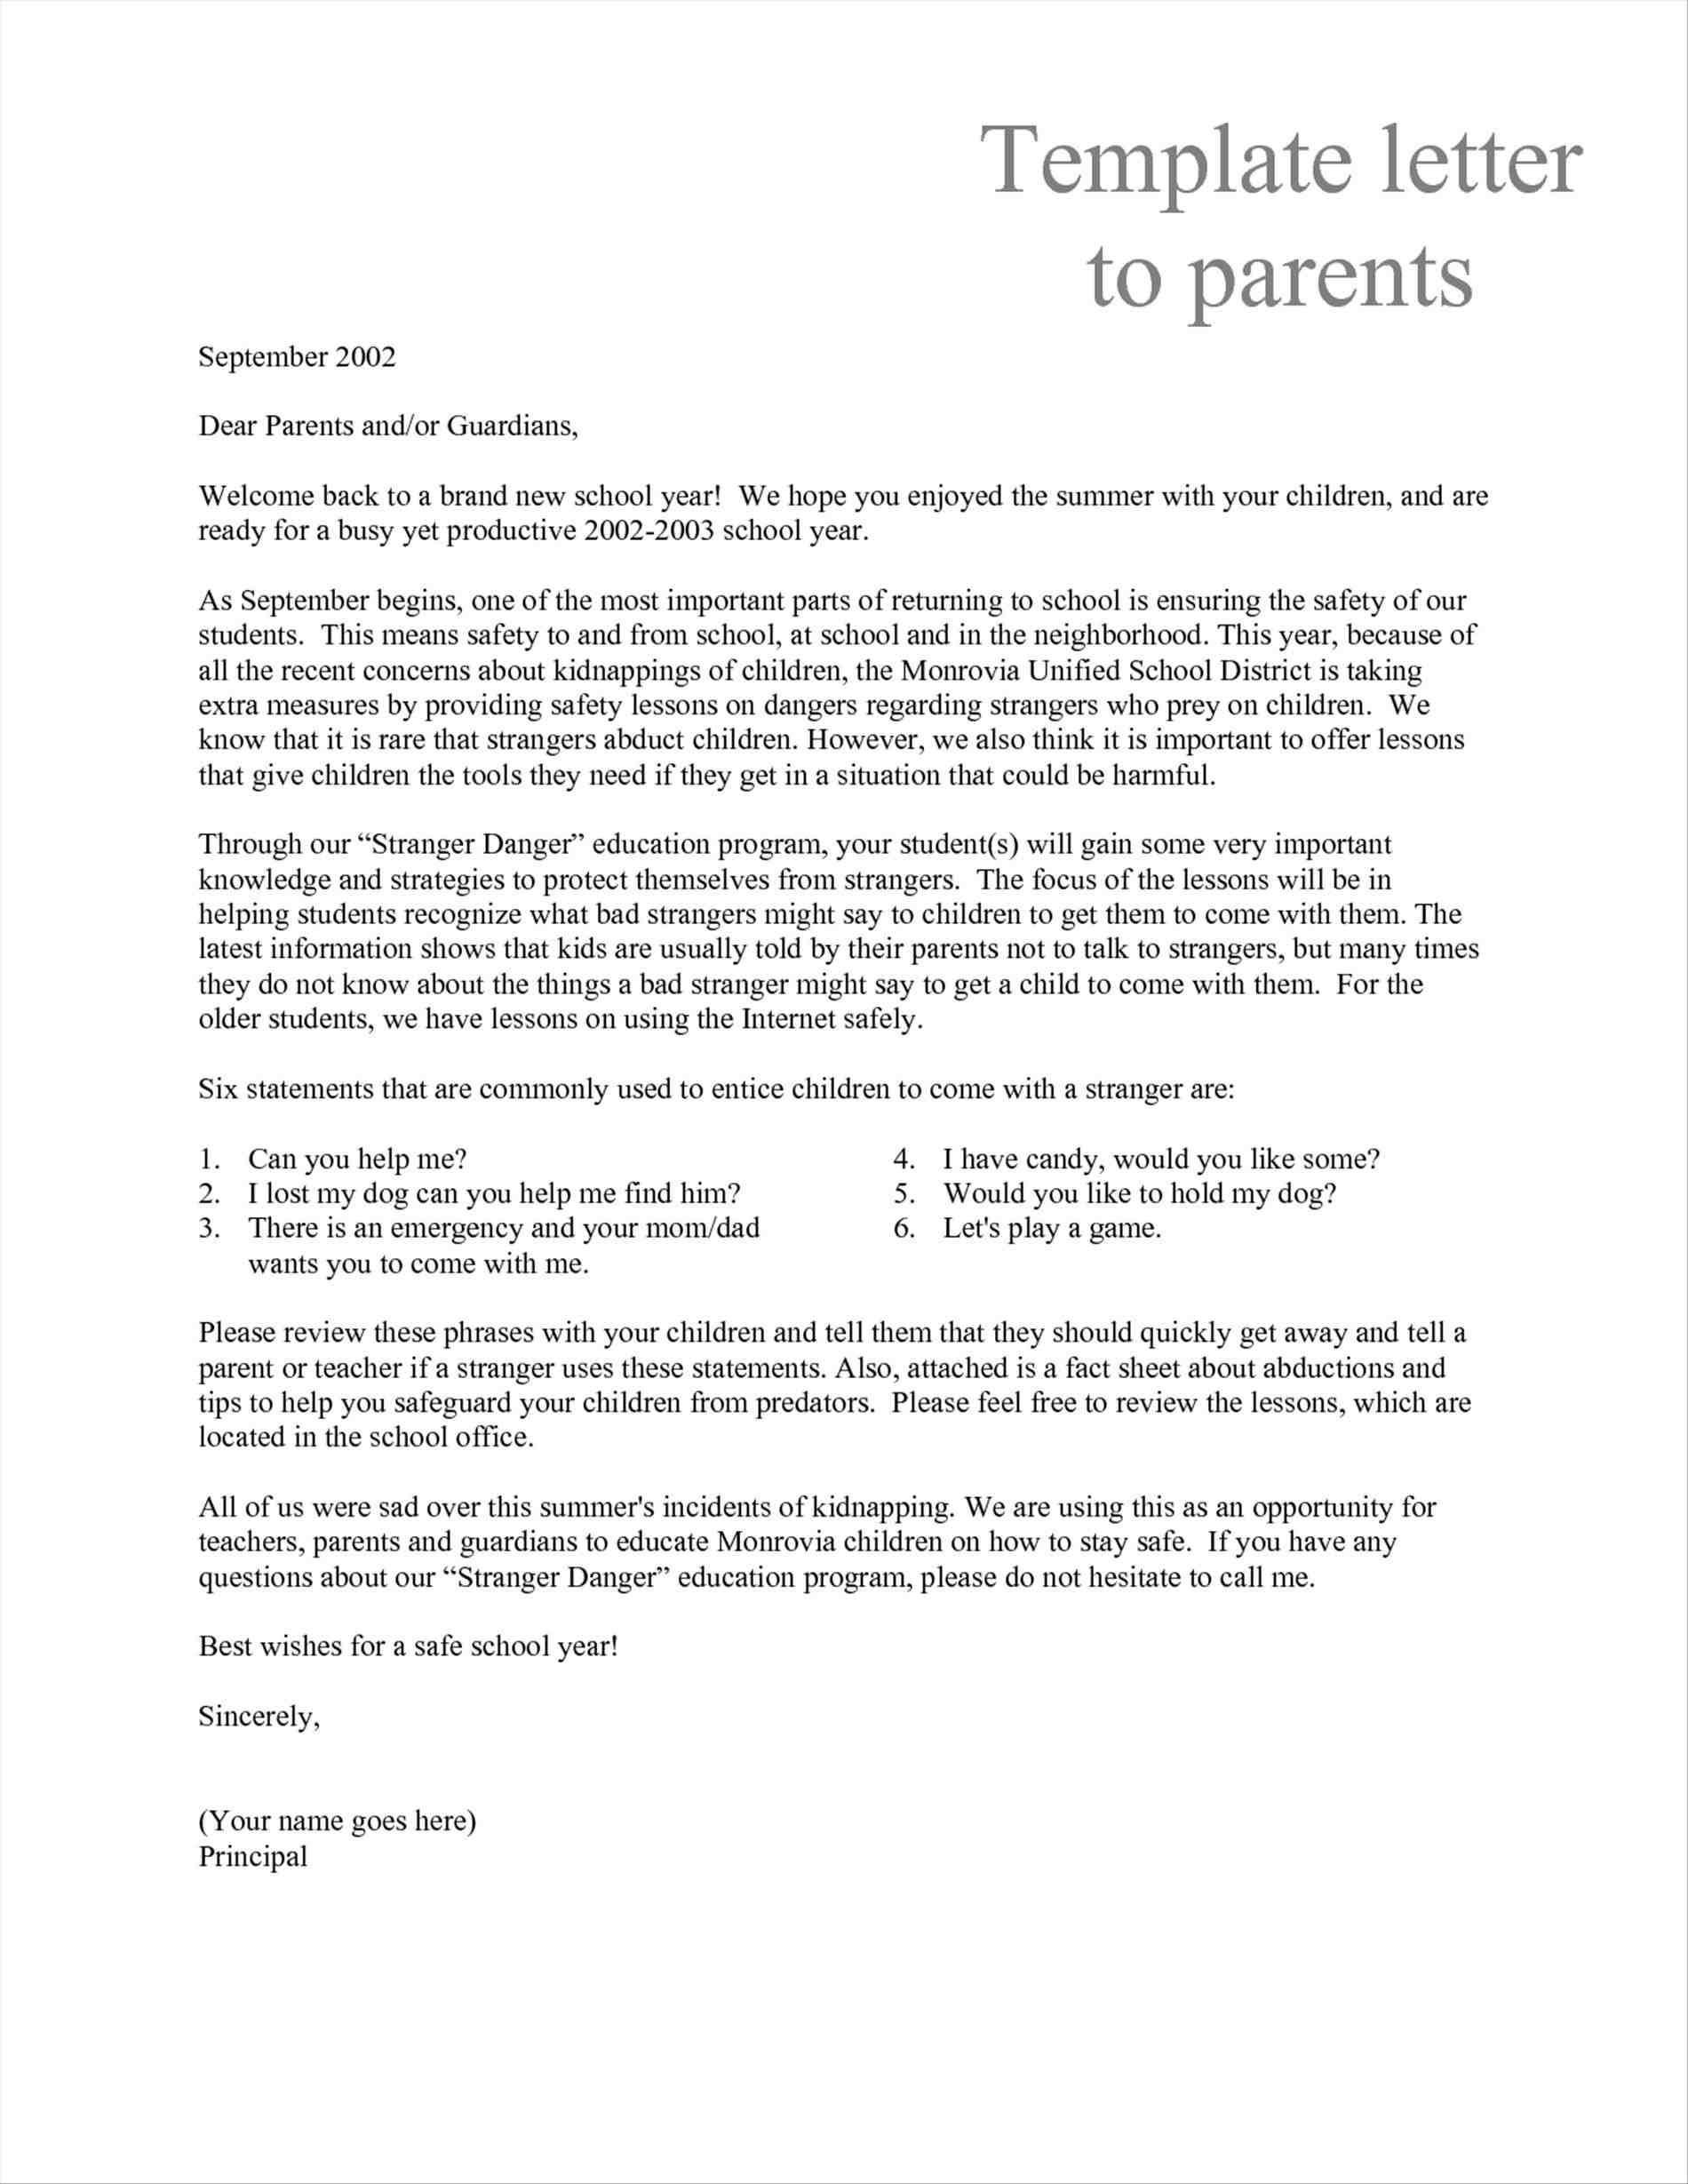 Letter to Parent Template Back to School Letter Meet the Letter Template Editable